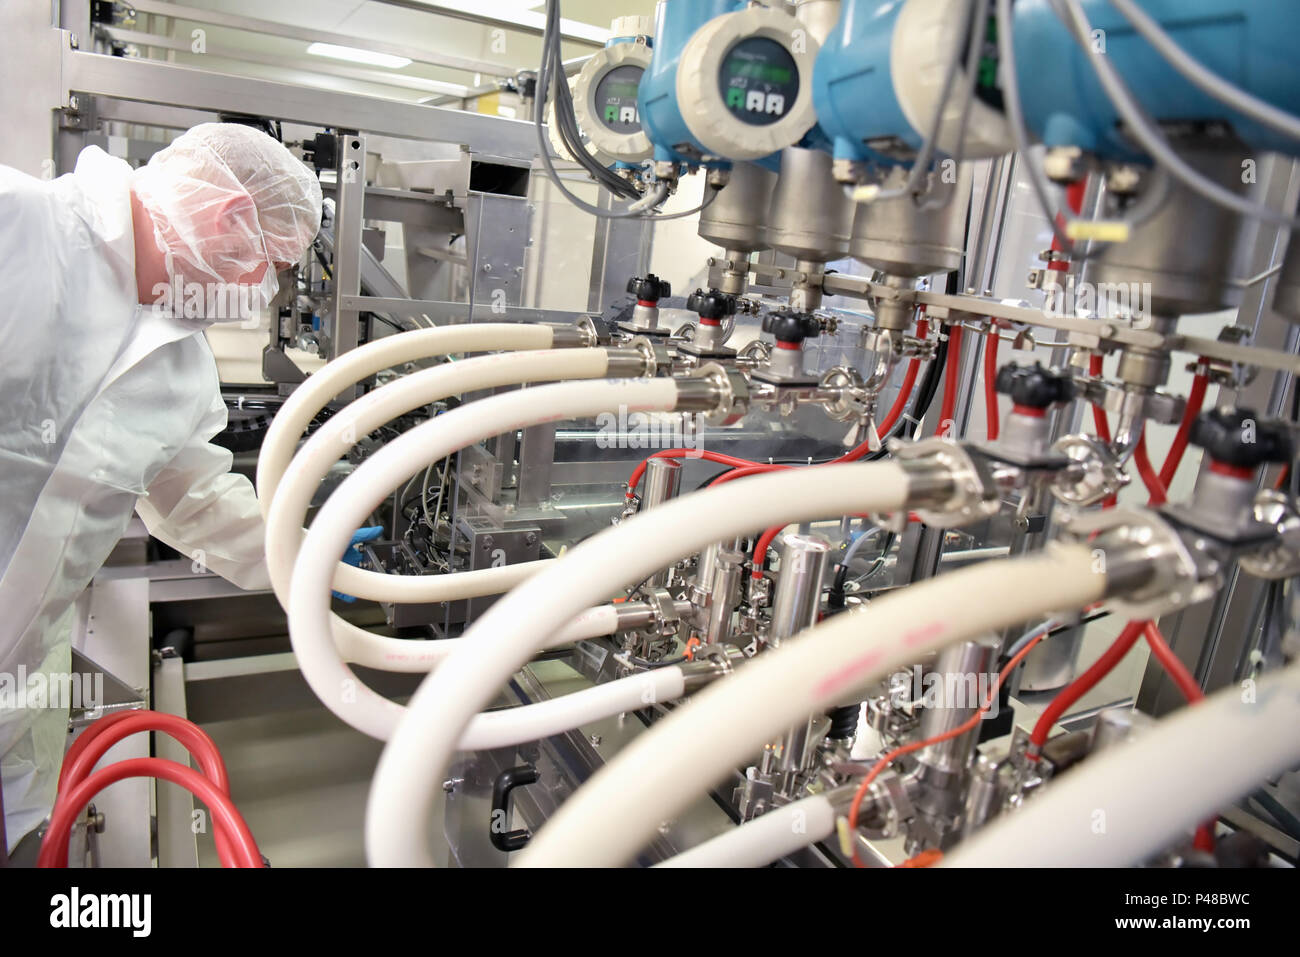 worker in sterile protective clothing in a clean room of a pharamzie company operates the technical plant for the production of drugs Stock Photo